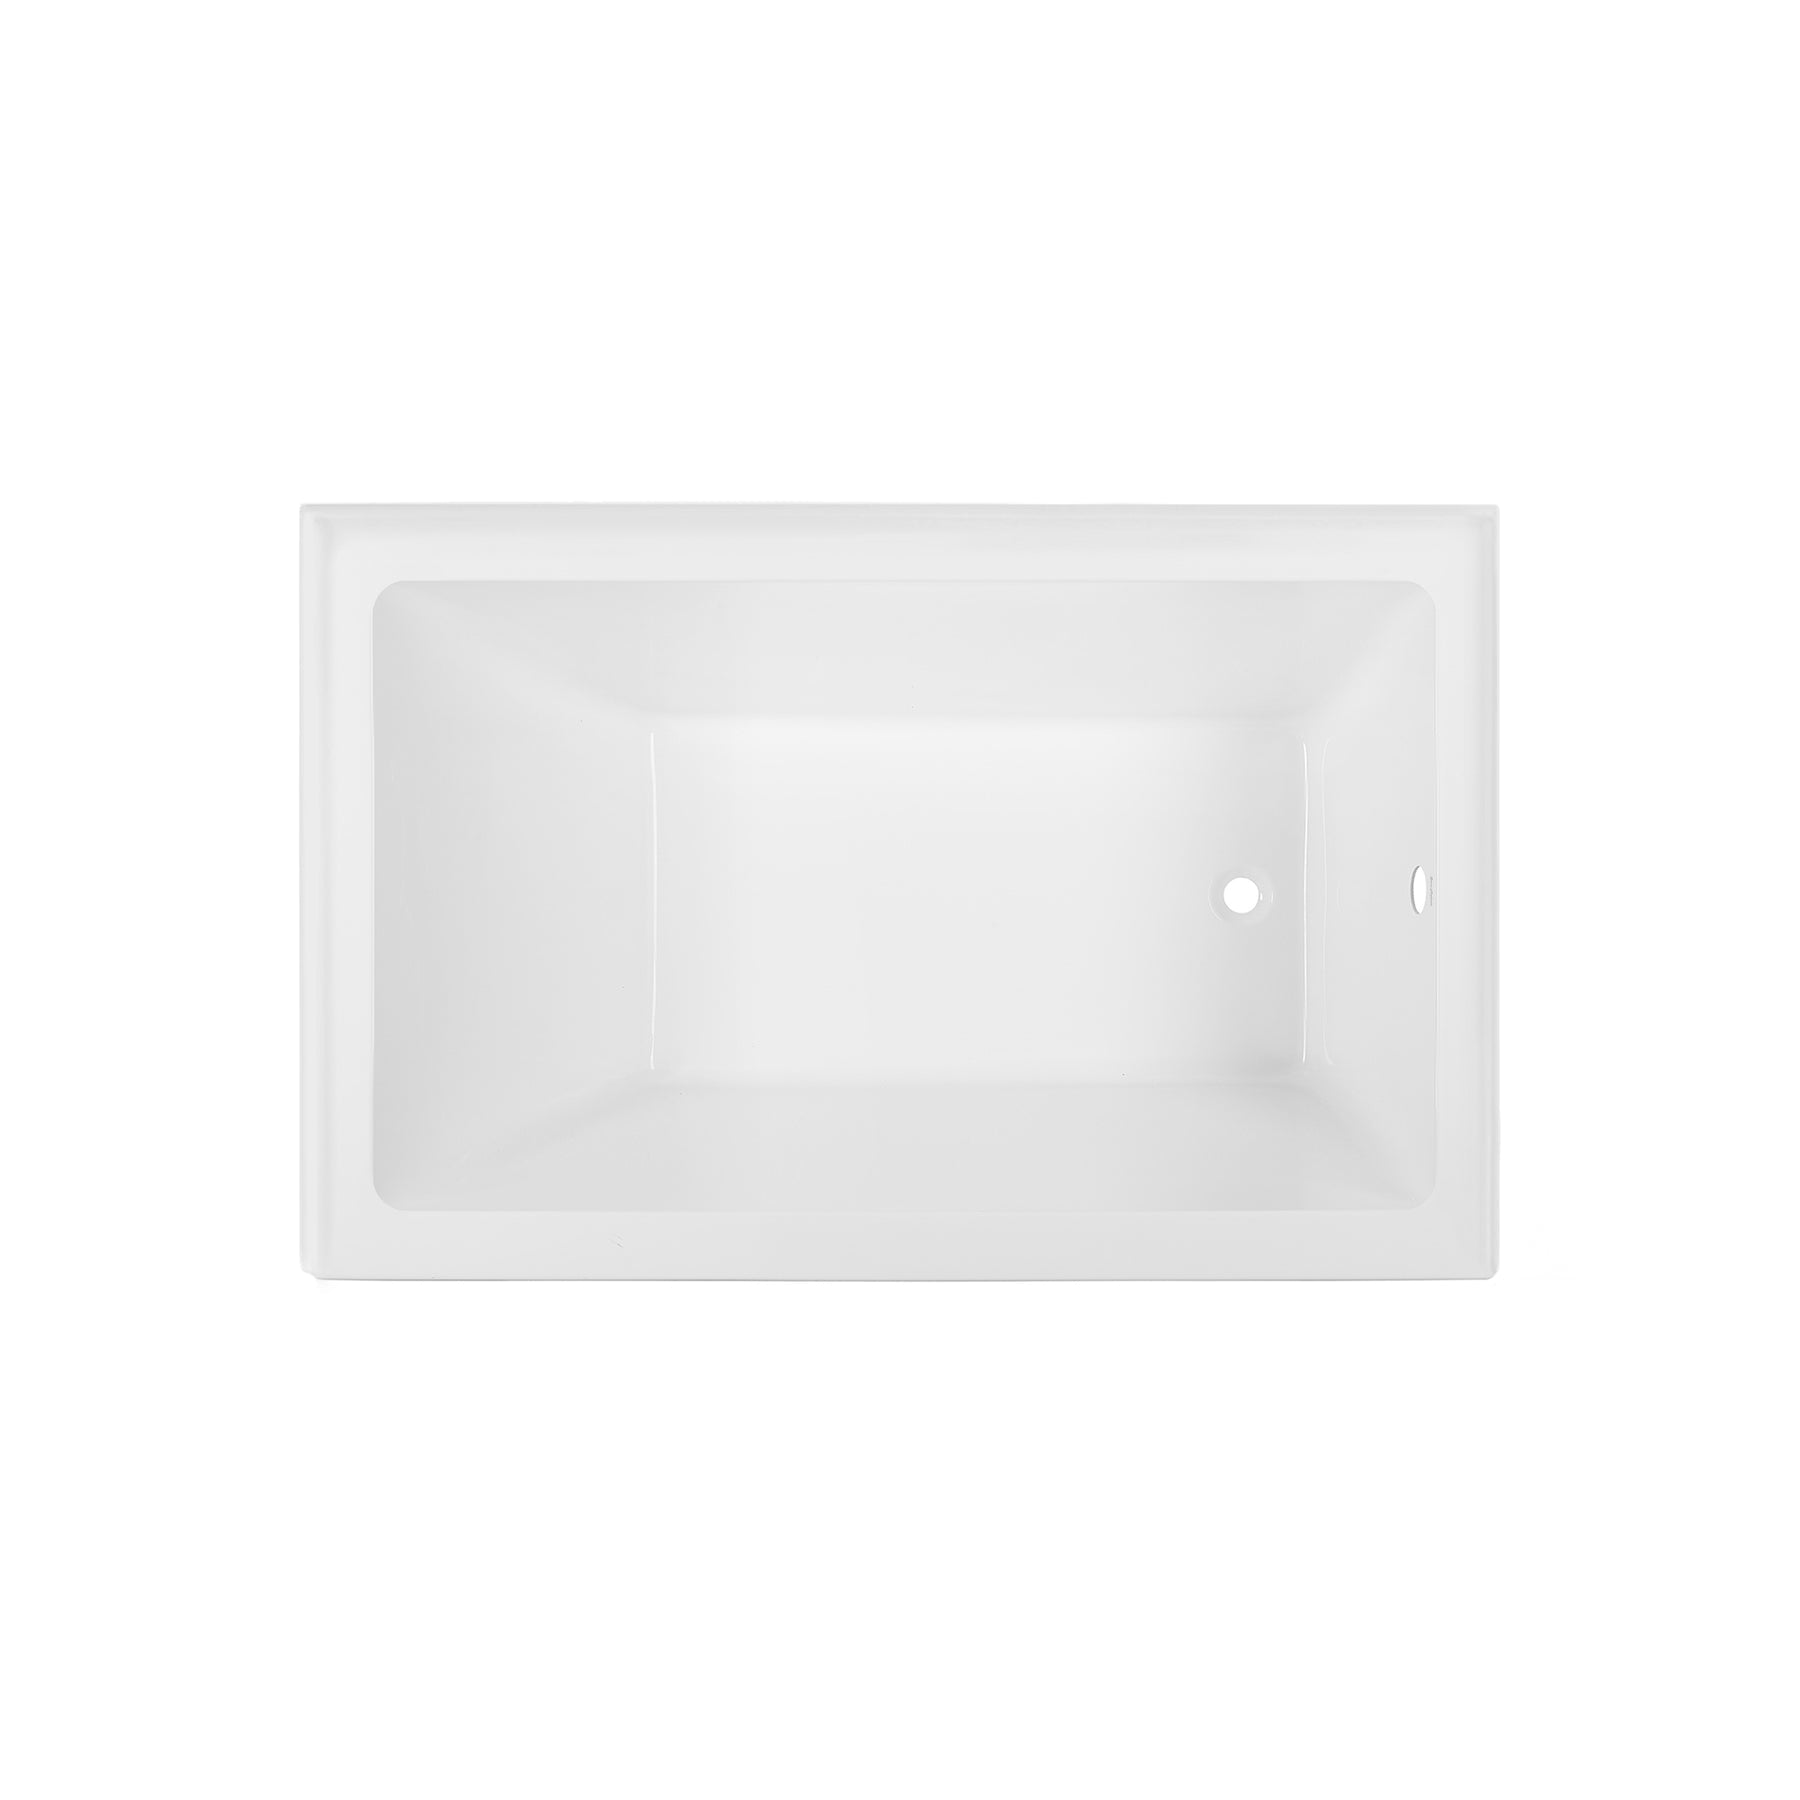 Swiss Madison Voltaire 48" X 32" Right-Hand Drain Alcove Bathtub with Apron - SM-AB551